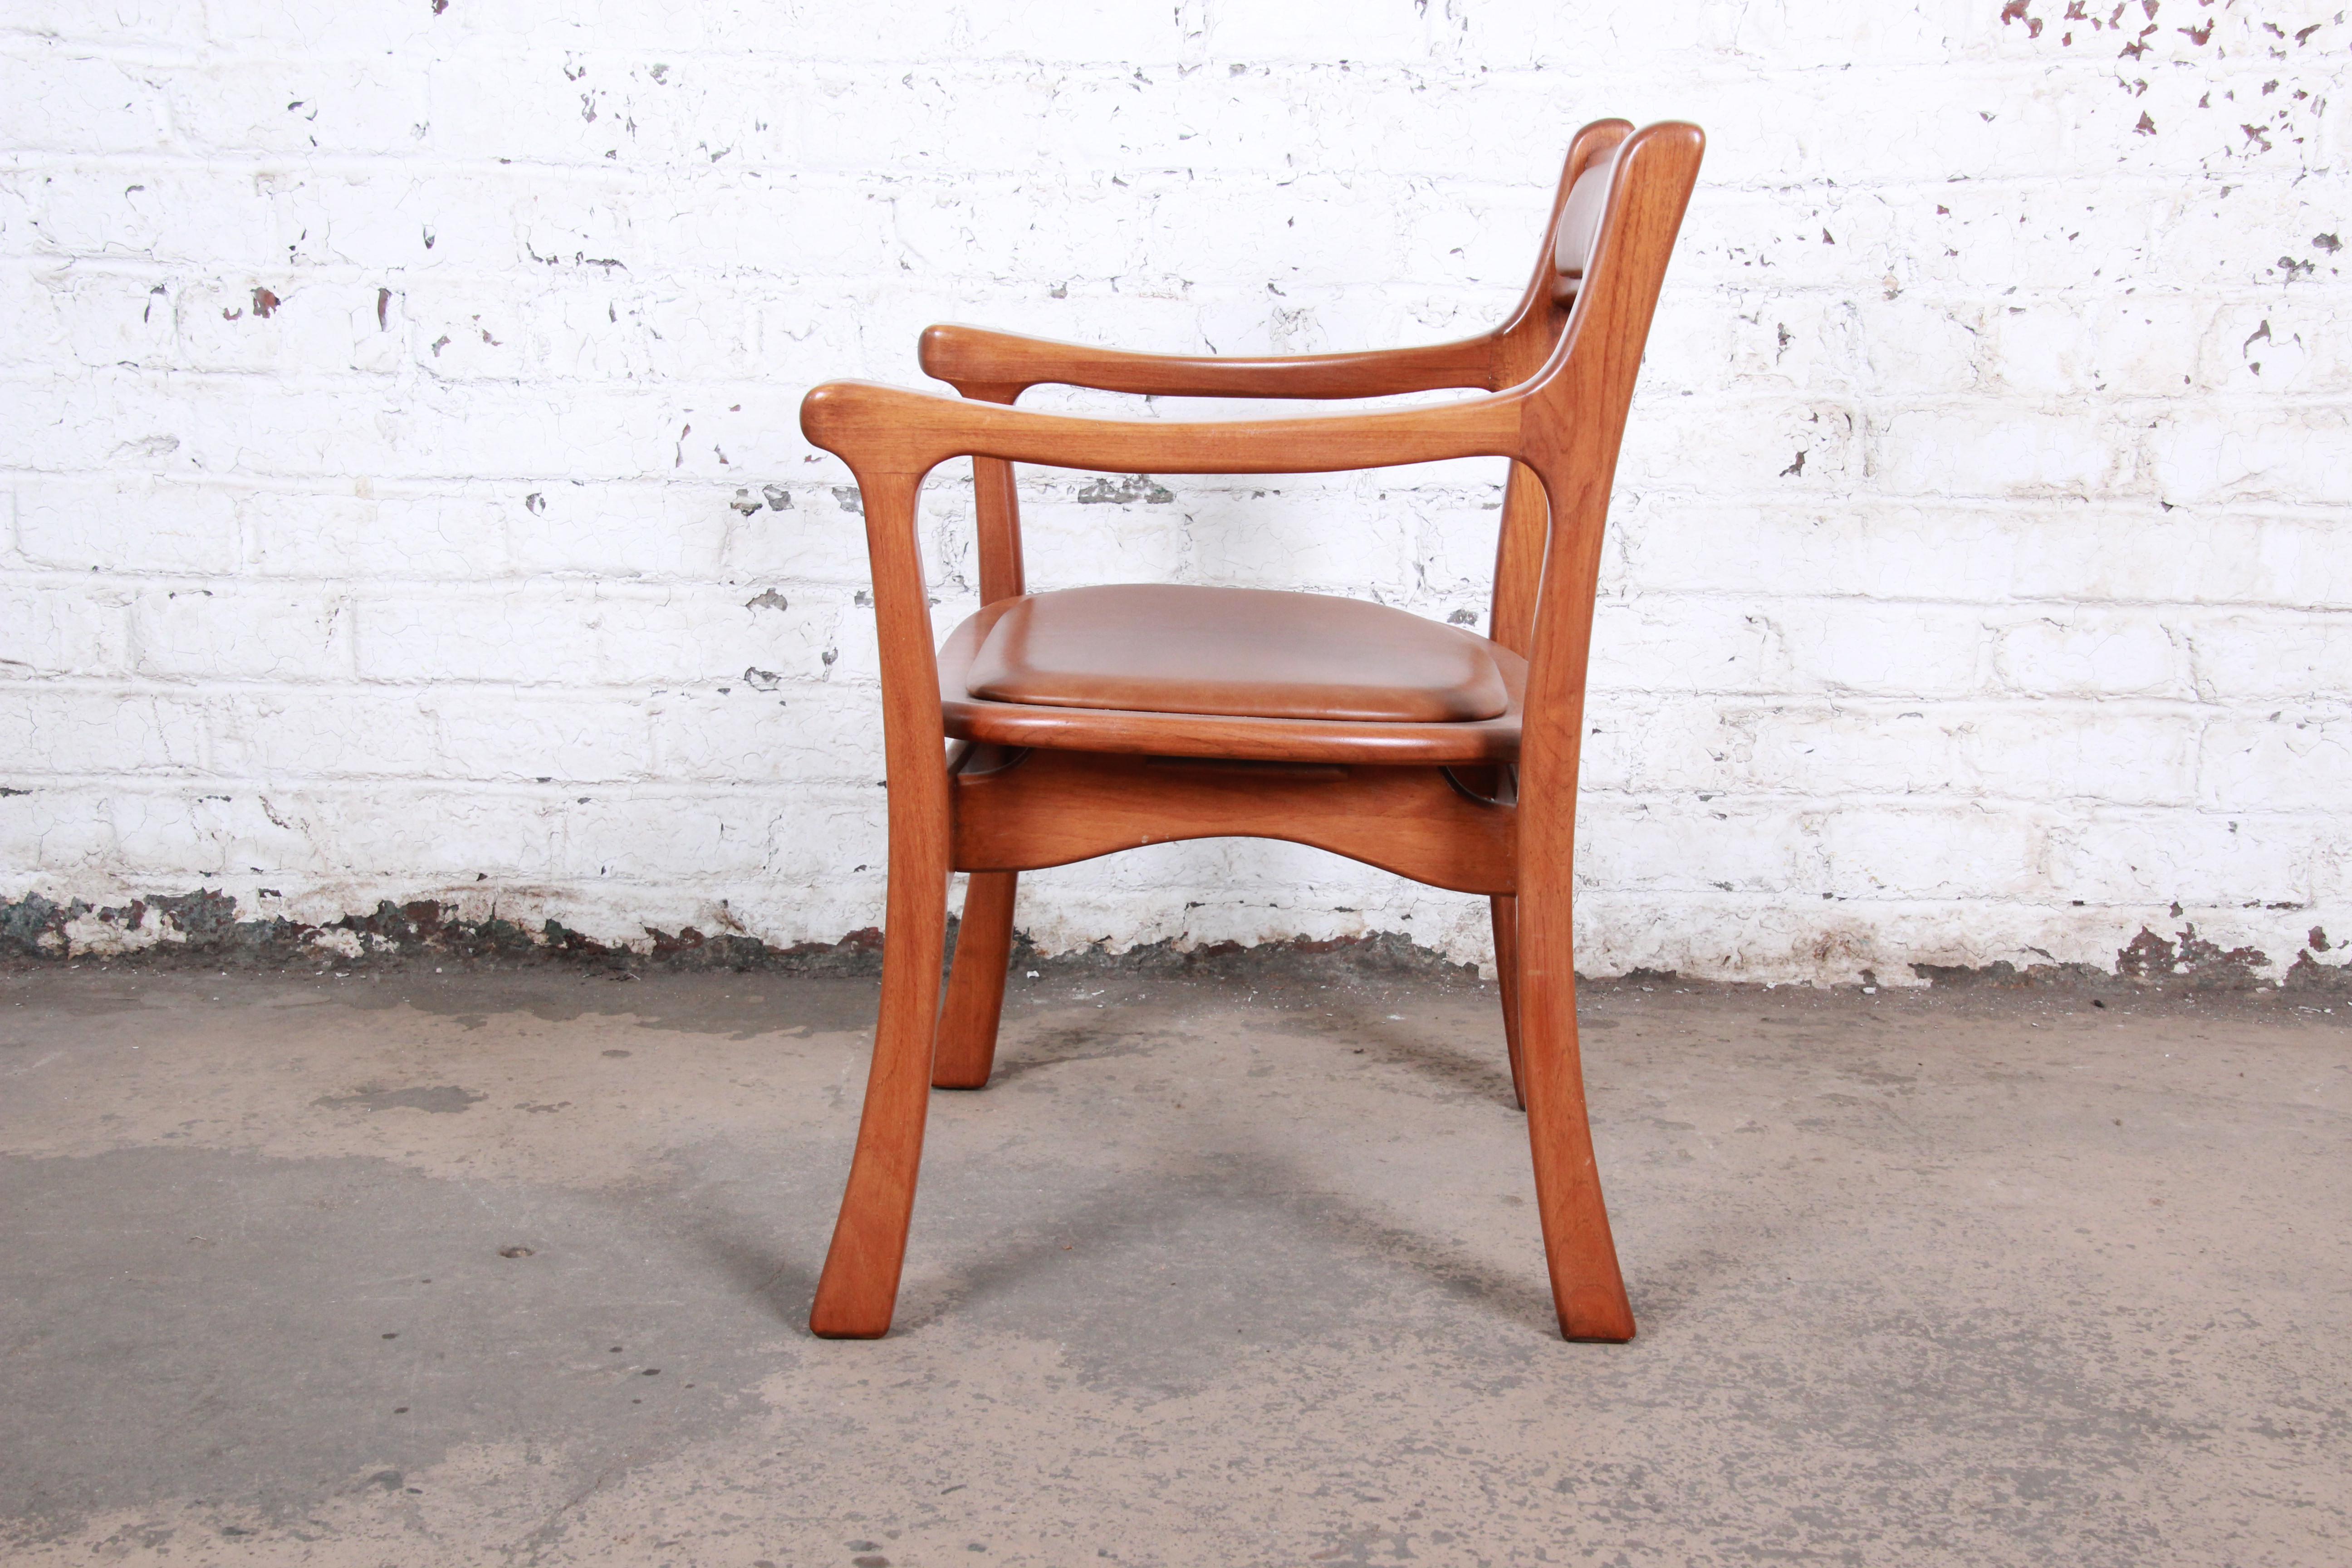 Sculpted Solid Teak and Leather Studio Crafted Club Chairs, circa 1960s For Sale 6